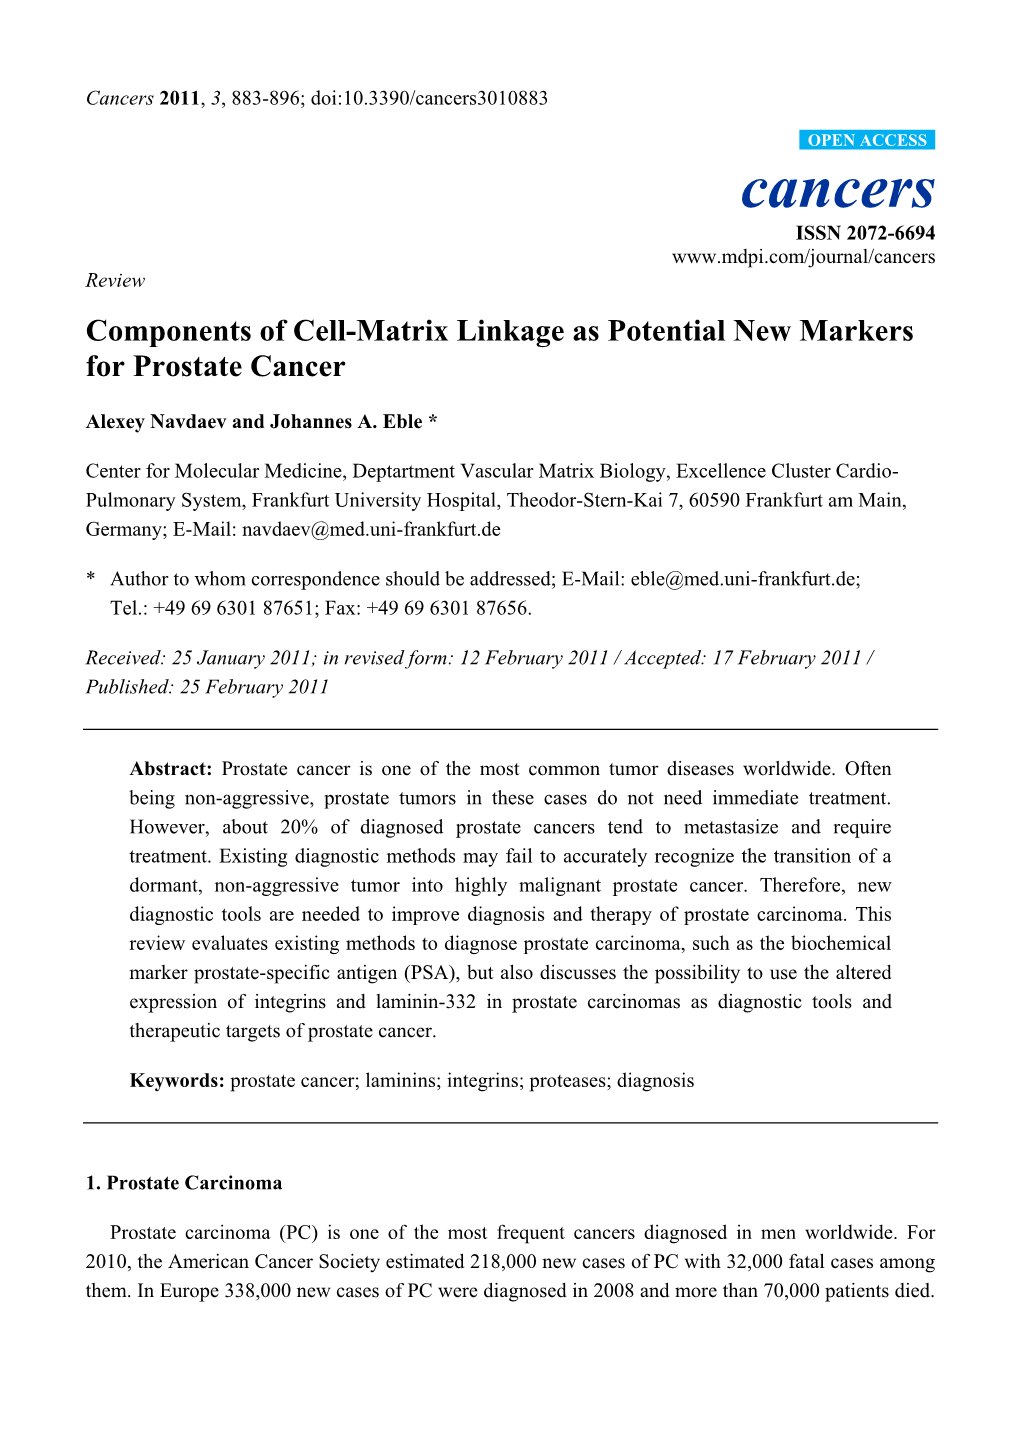 Components of Cell-Matrix Linkage As Potential New Markers for Prostate Cancer